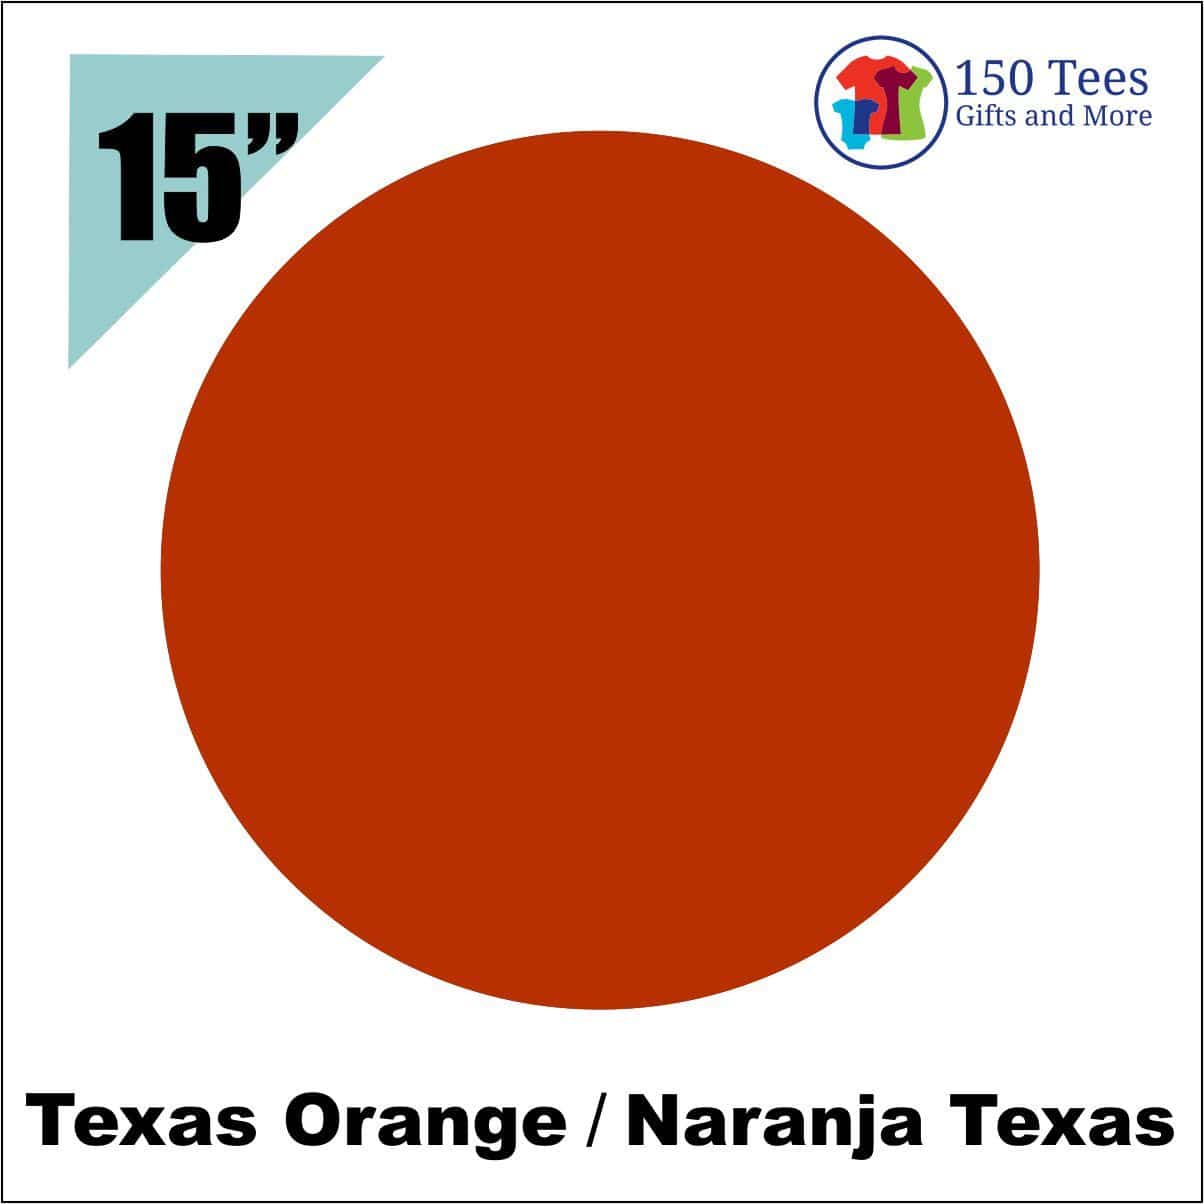 EasyWeed HTV 15" - Texas Orange - 150 TEES GIFTS & MORE